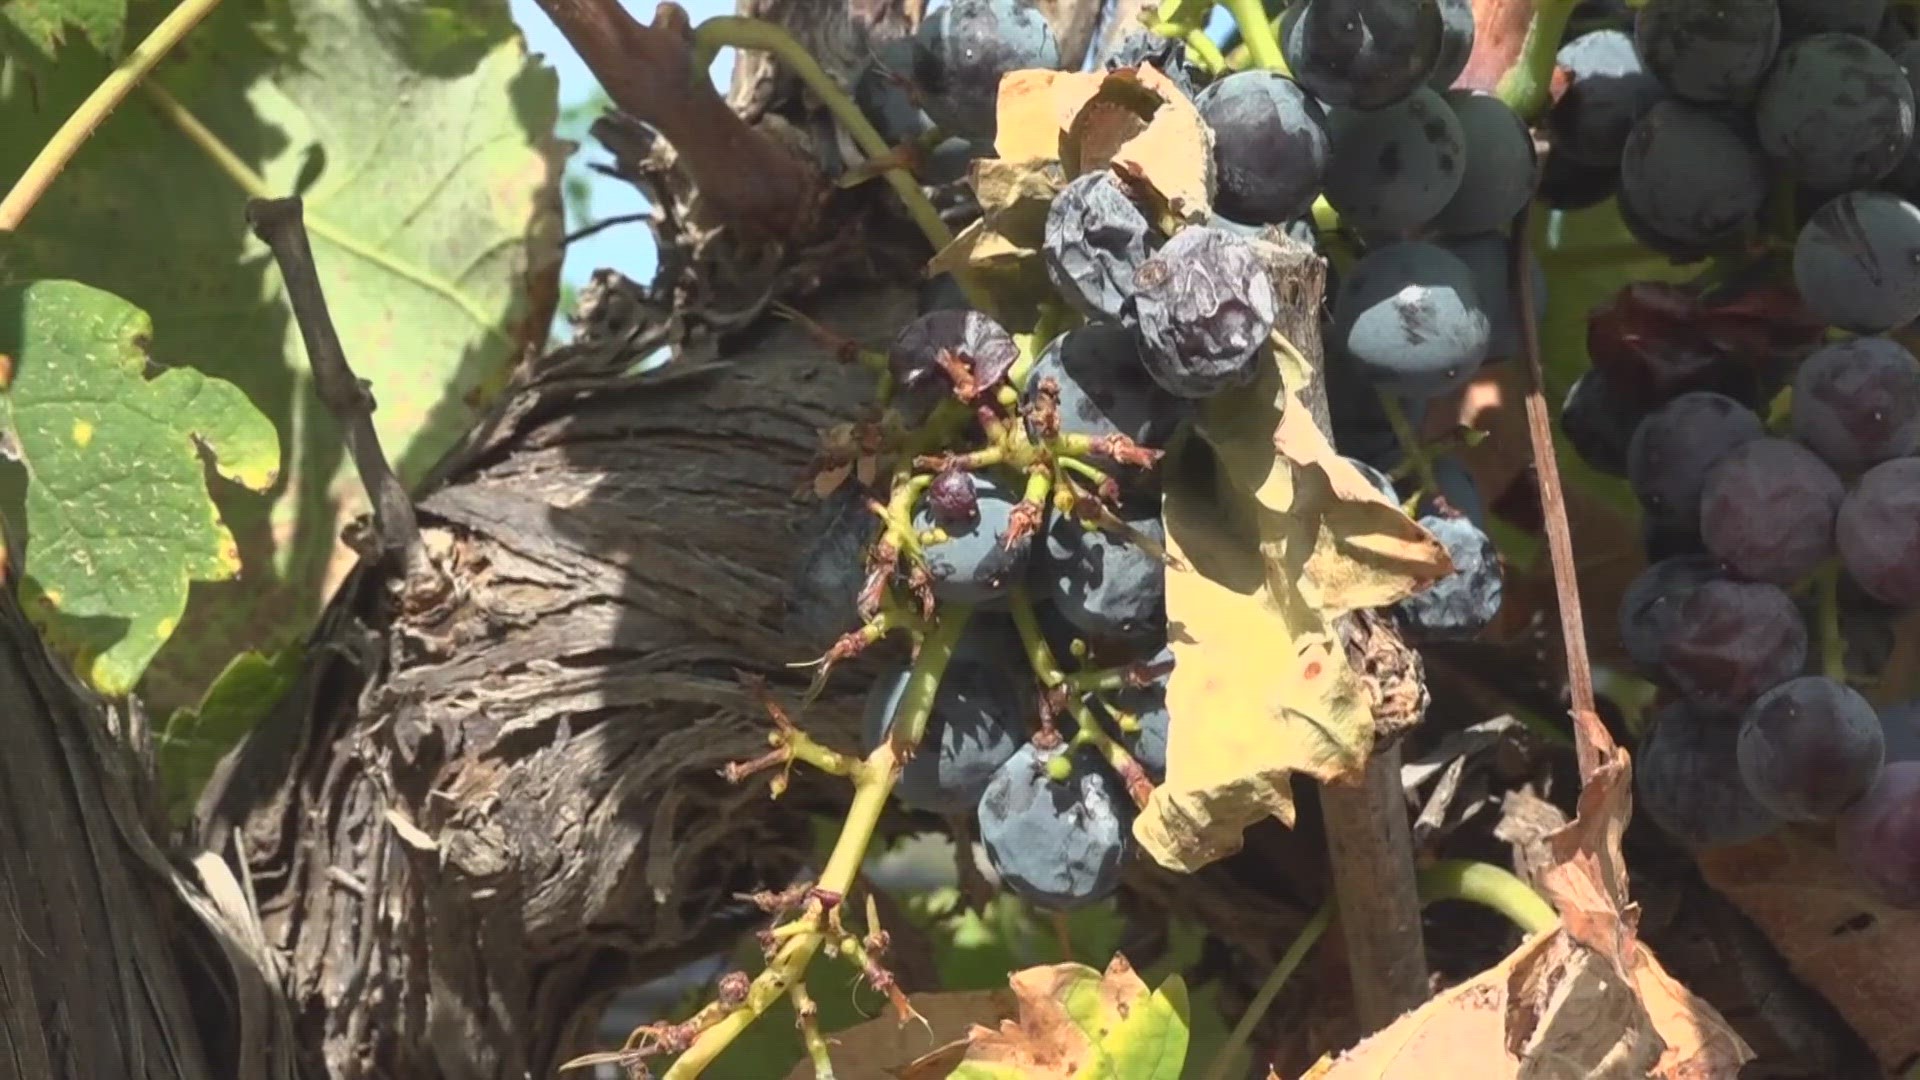 Hear what vineyard owners are doing to make sure their business survives the excessive Texas heat.